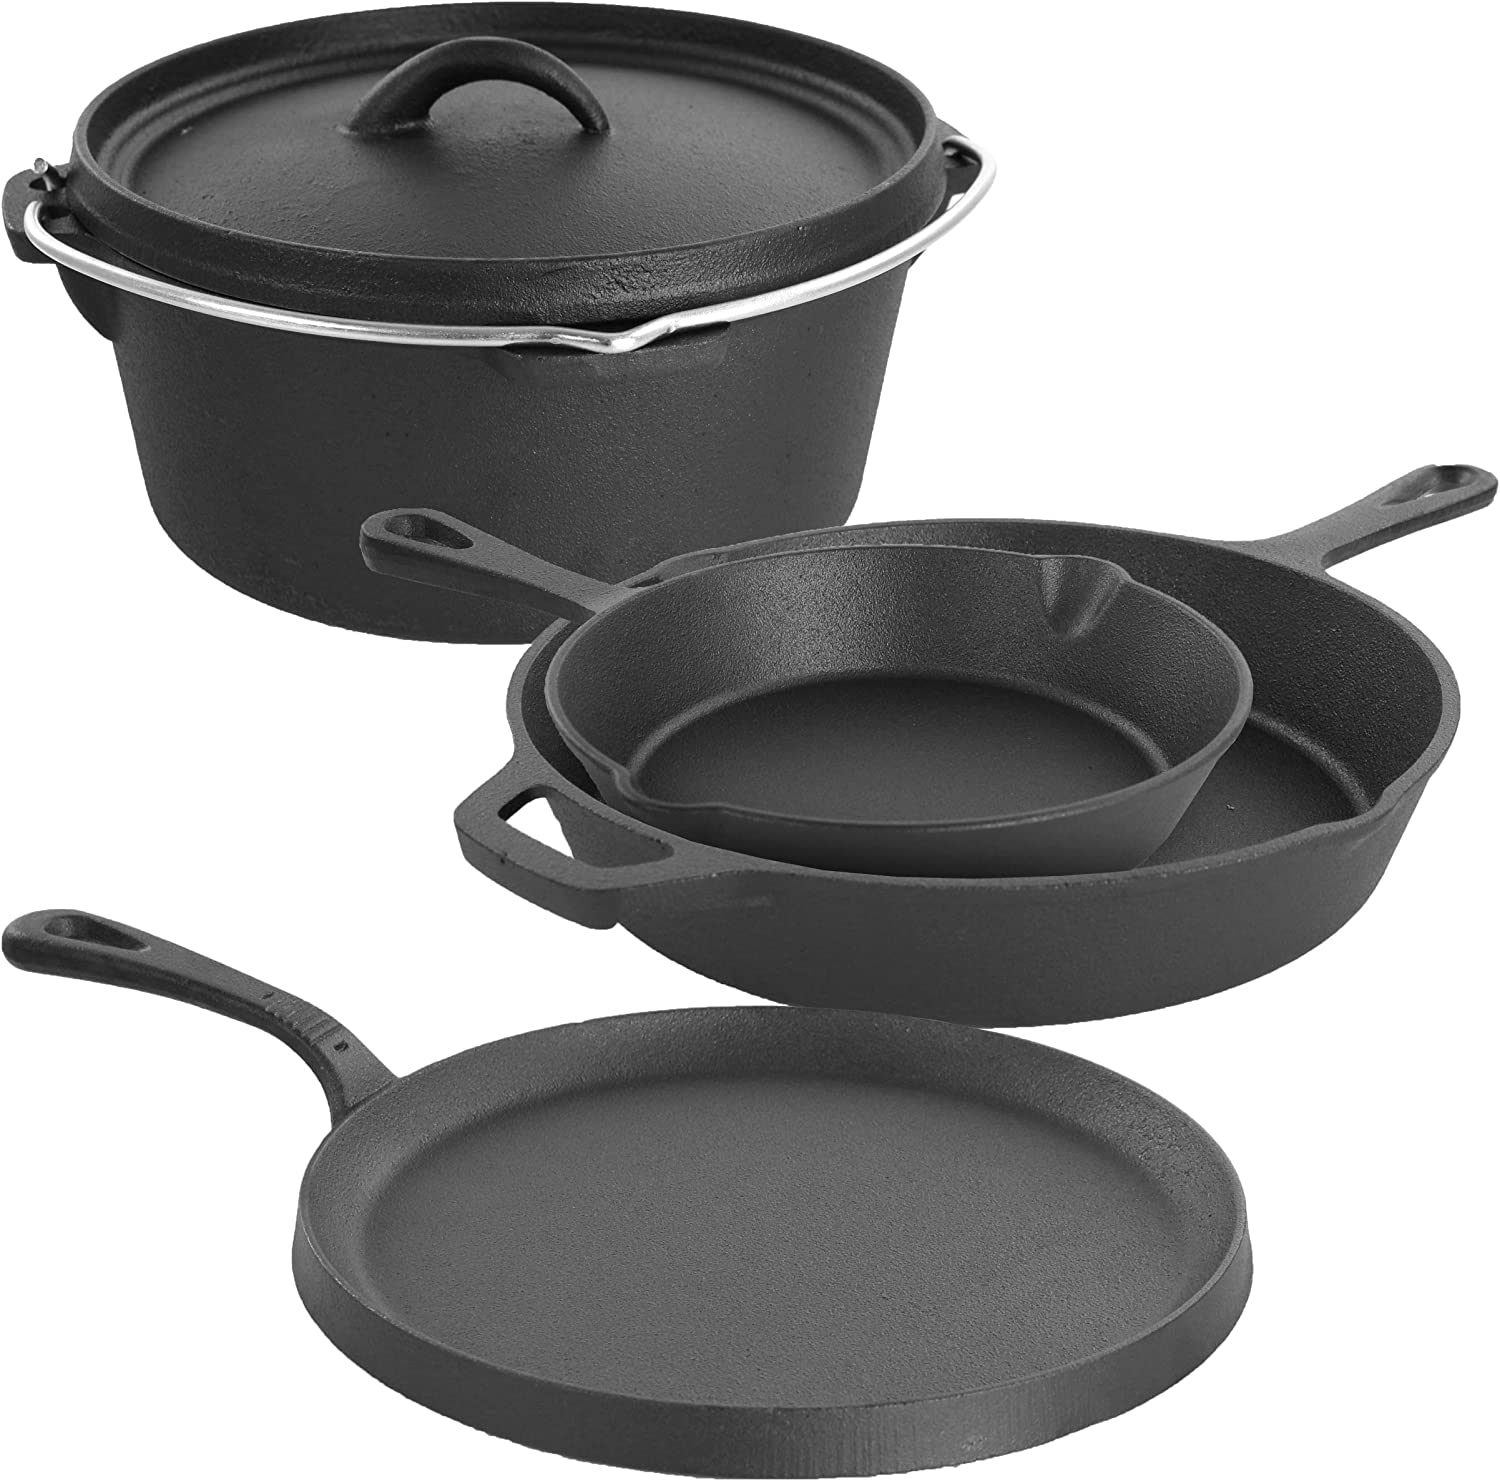 Uncoated Cast iron Cookware Set